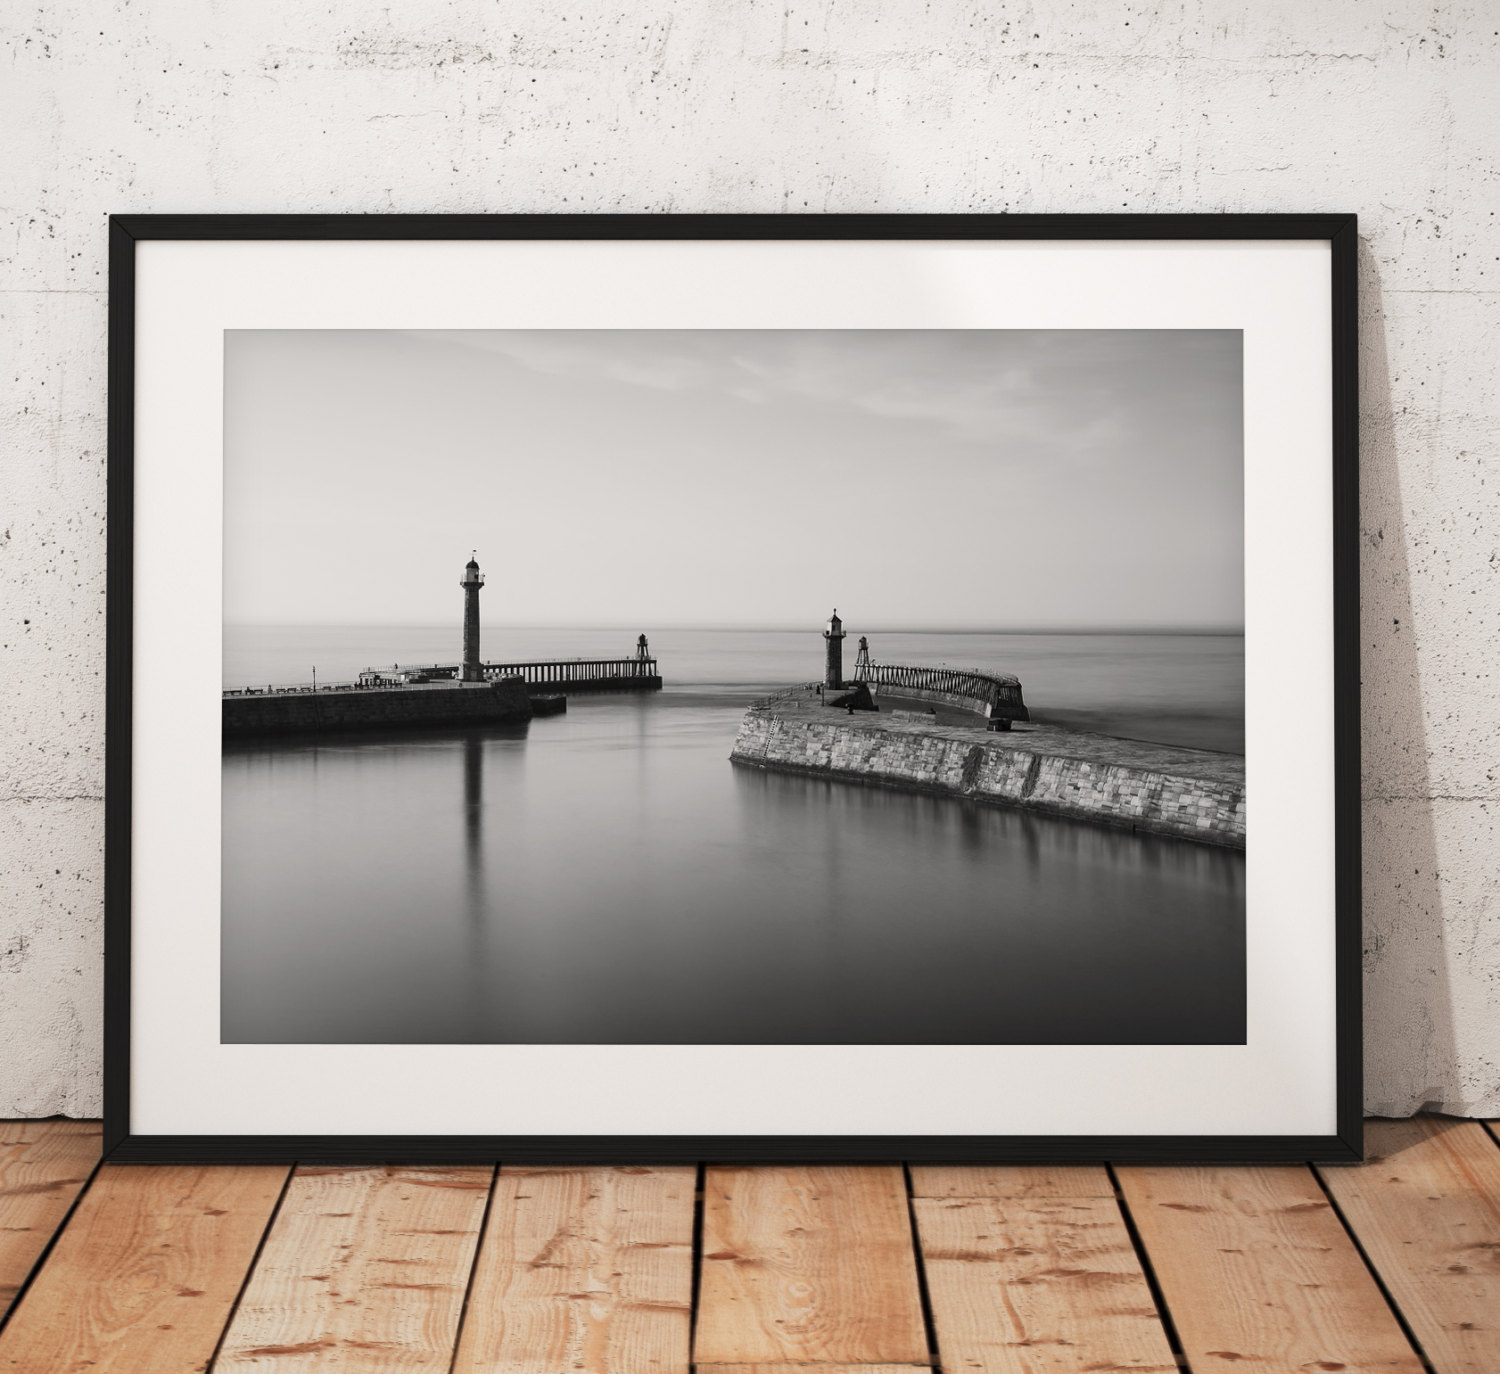 Seaside landscape photography Whitby Pier. North York Moors, England. Landscape Photo. Black and White long exposure. Wall Art.